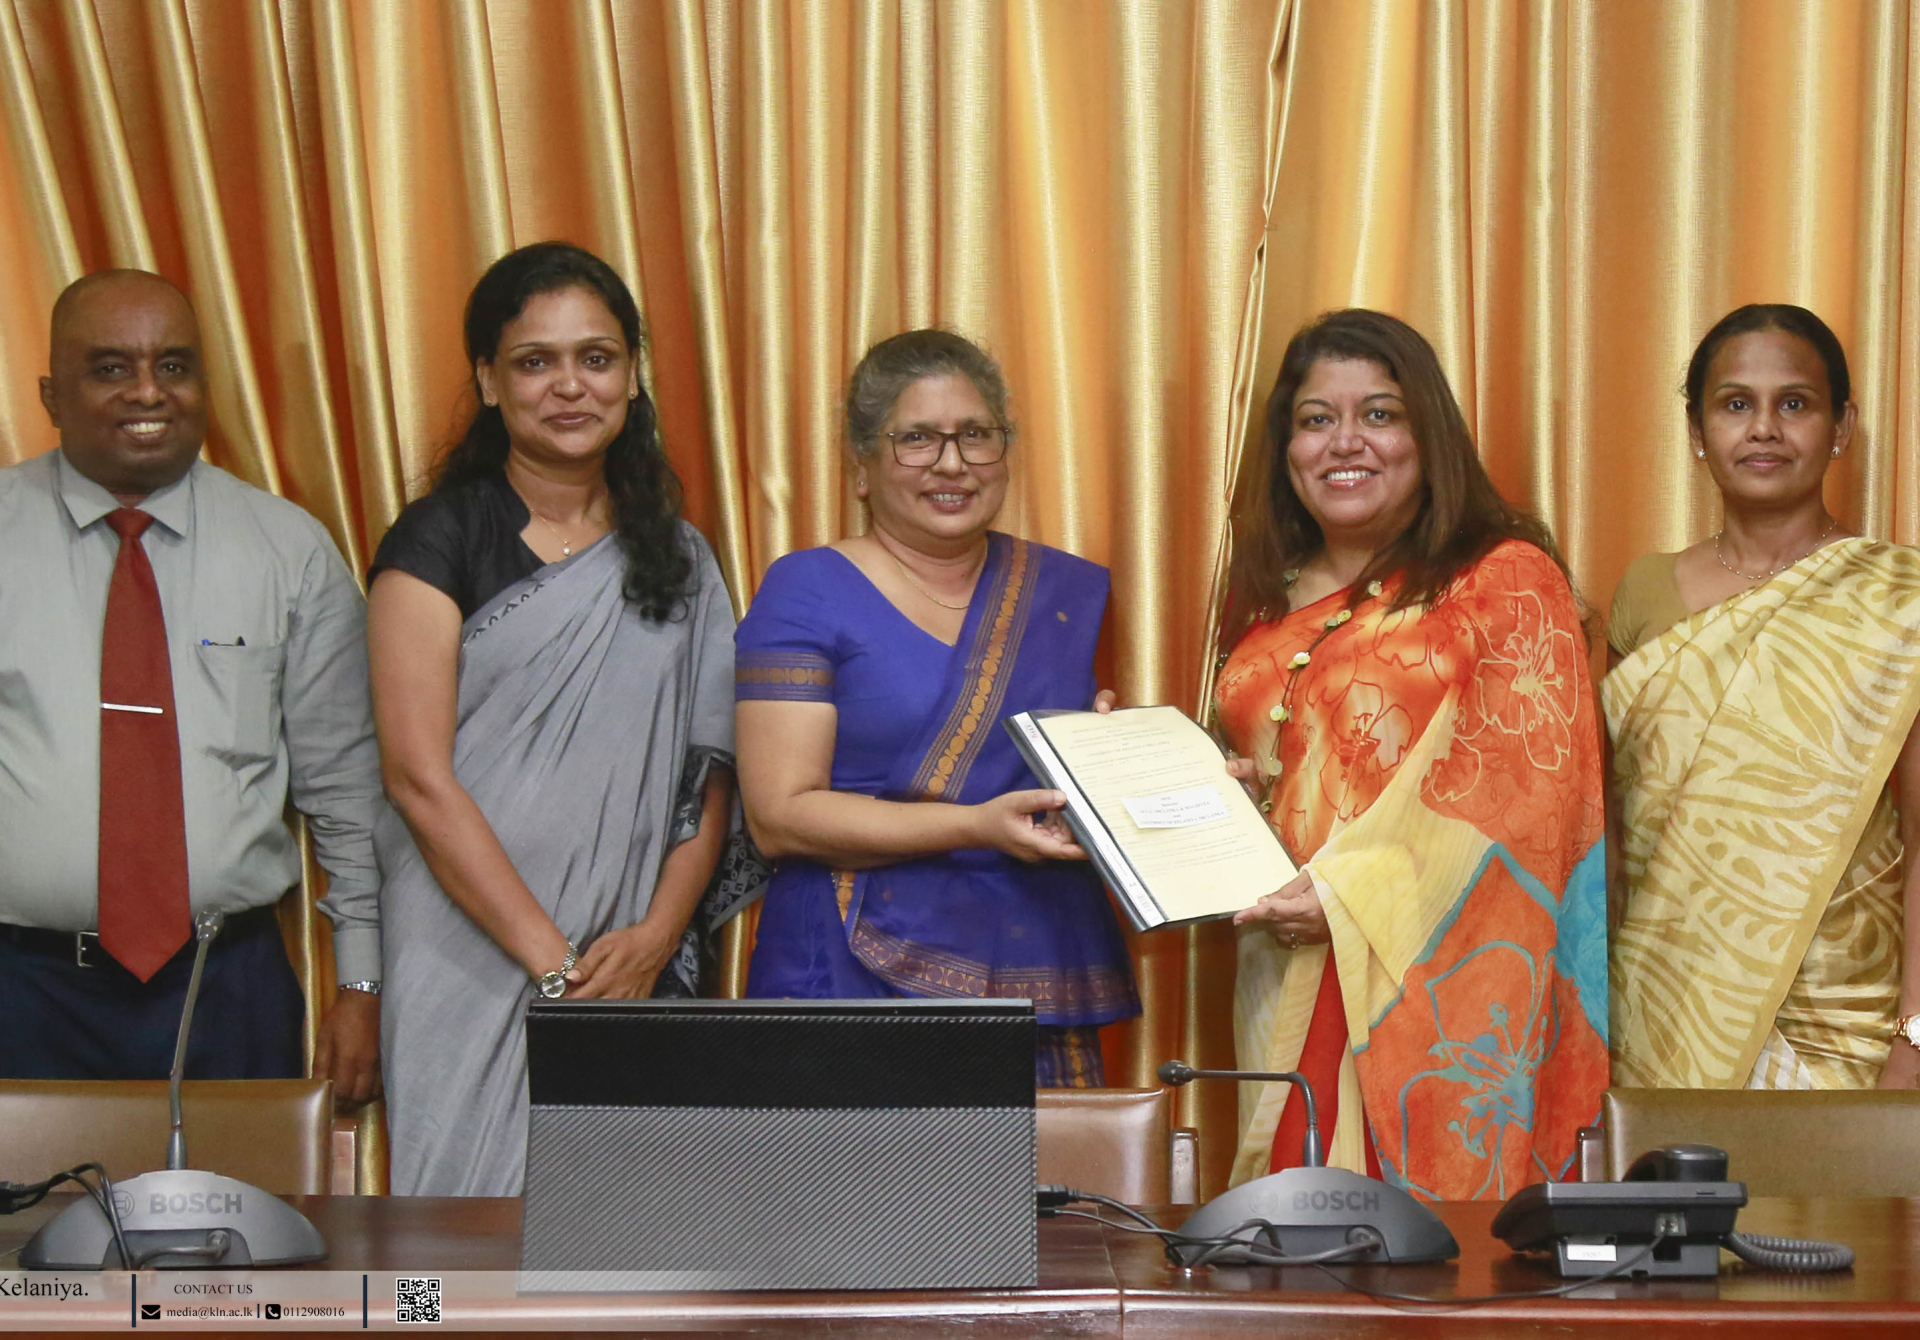 MoU Signed Between the University of Kelaniya and the Association of Chartered Certified Accountants (ACCA), Sri Lanka